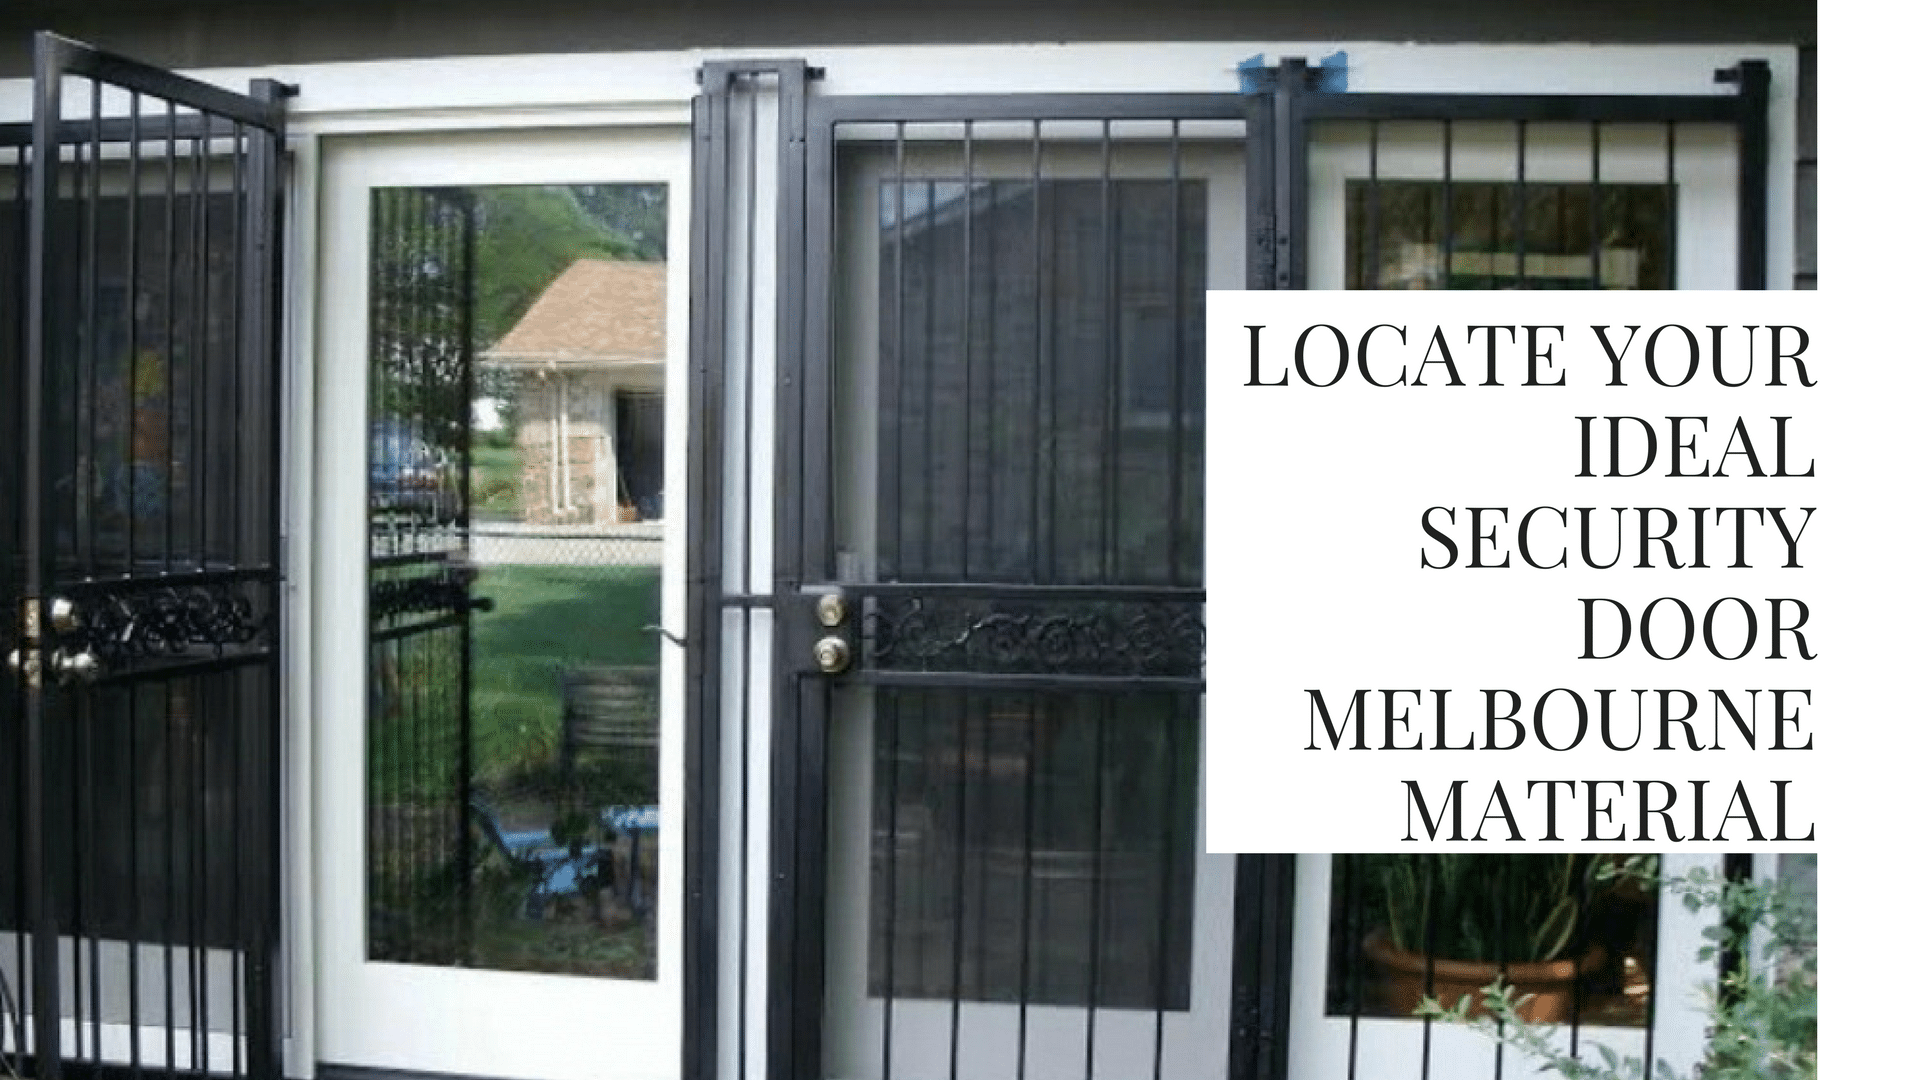 List of Questions for Your Security Doors Installer